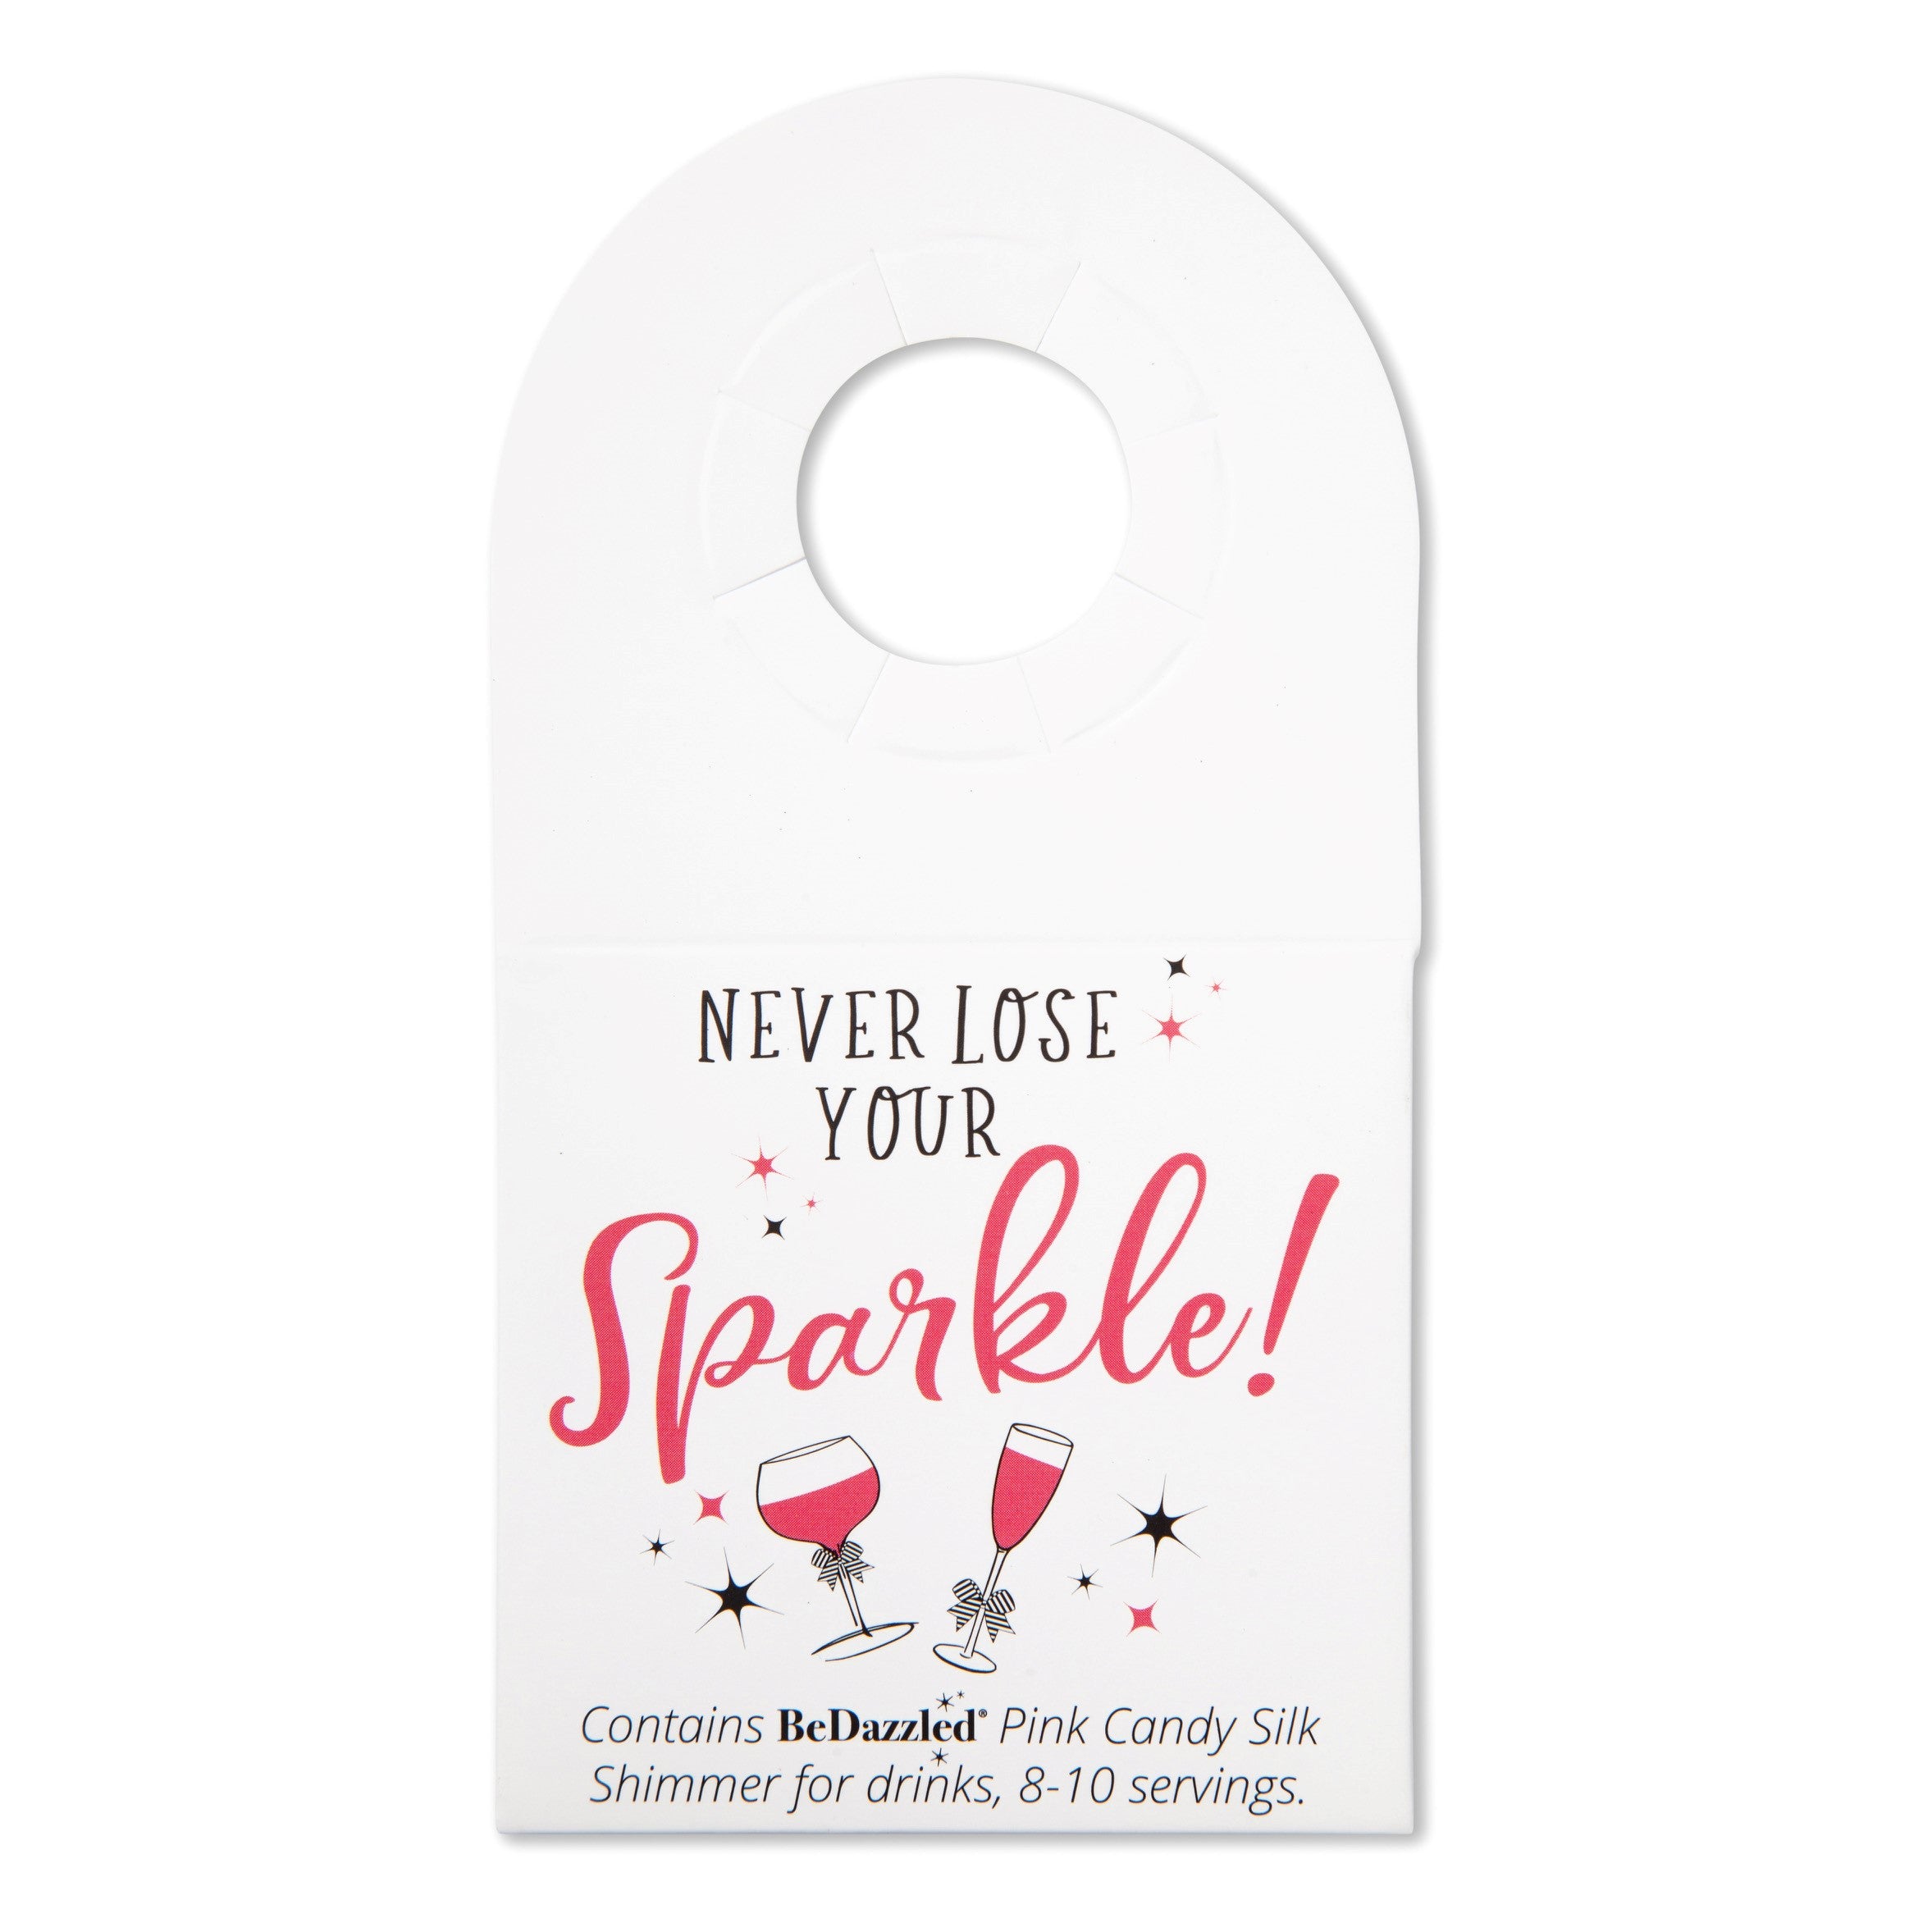 Never Lose Your Sparkle! - bottle neck gift tag containing PINK CANDY shimmer